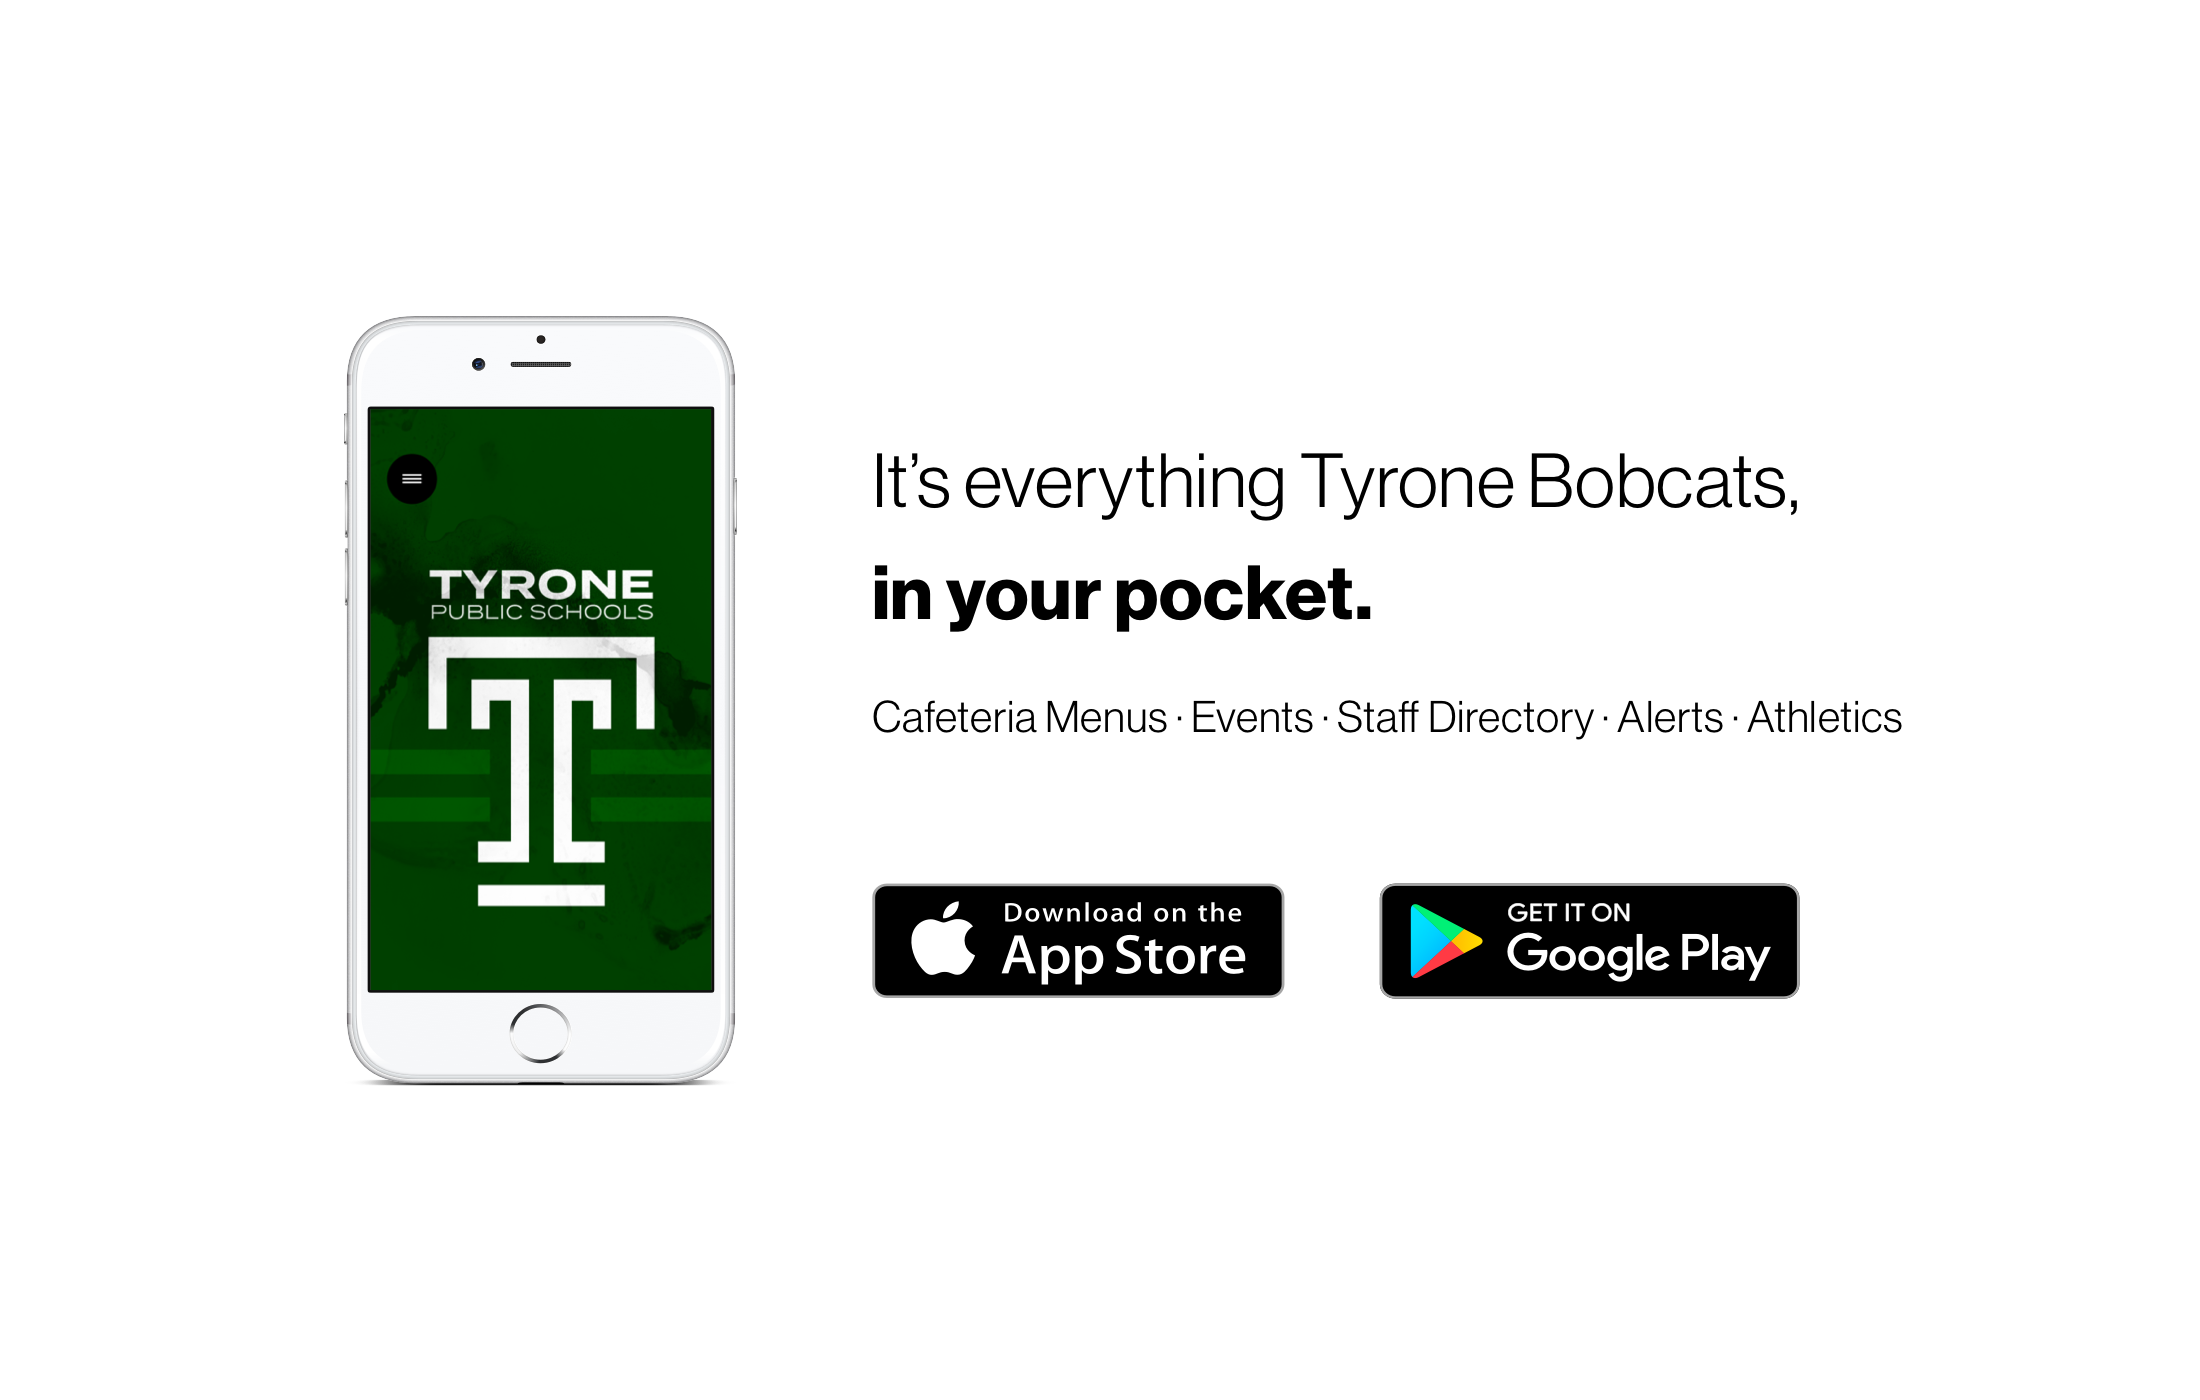 It's everything Tyrone Bobcats in your pocket